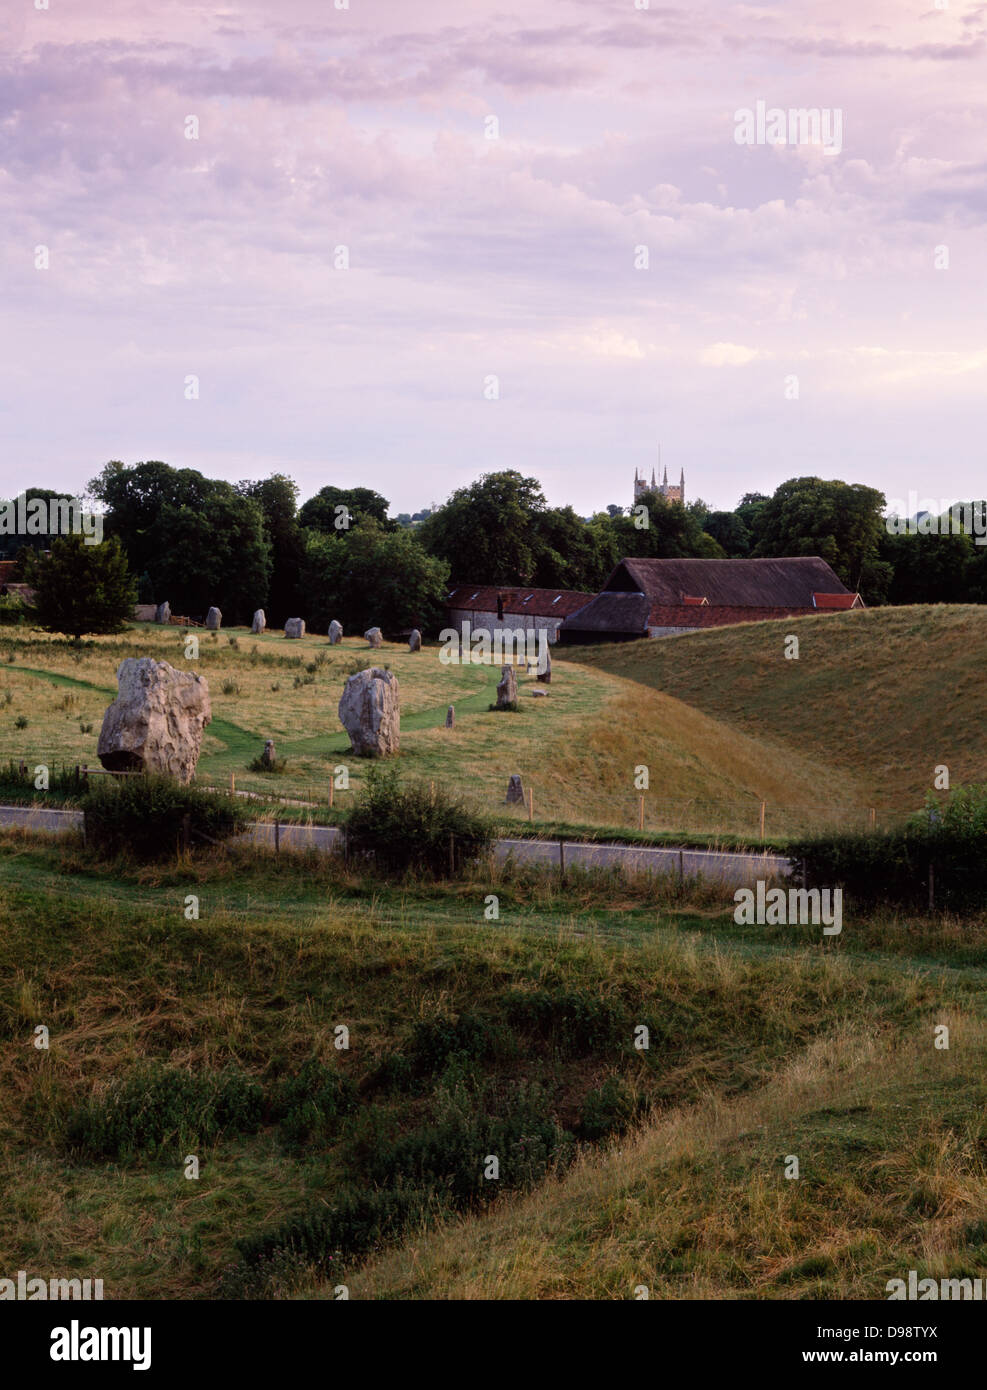 Avebury, Wiltshire: the NW quadrant of the Great Circle with the bank, ditch, Swindon Stone (L) and northern entrance causeway of the henge monument. Stock Photo